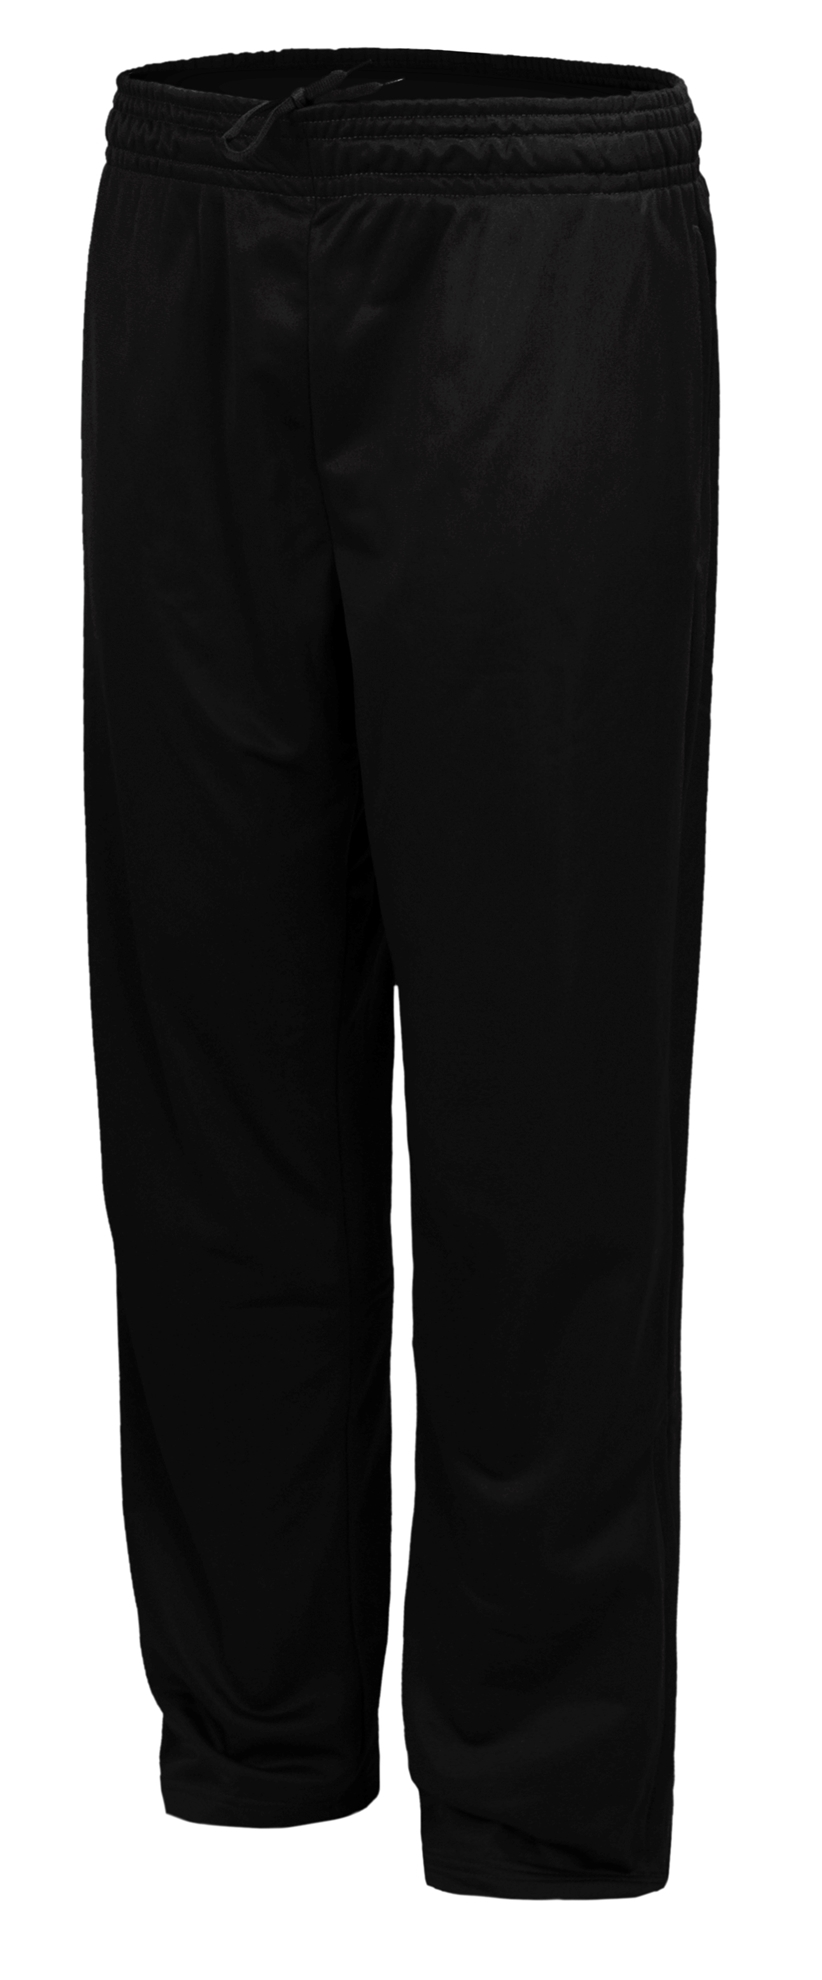 BAW Athletic Wear EF111 - Adult The Elements Fleece Pant